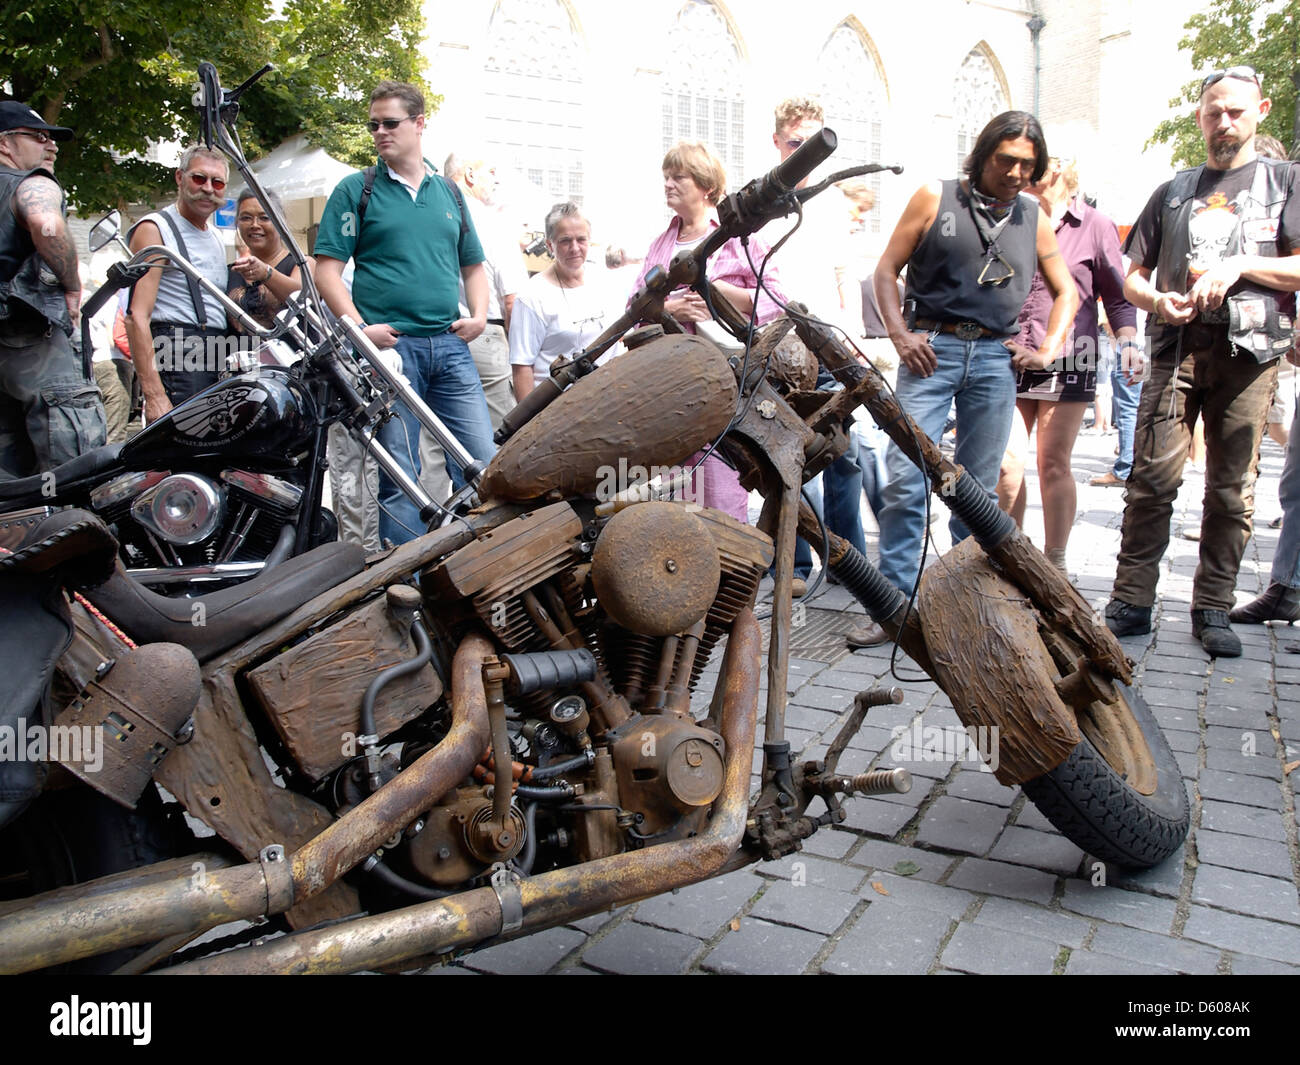 So called 'rat bike' a specific style of custom bike this one looks very rusty. Harley day in Breda the Netherlands Stock Photo